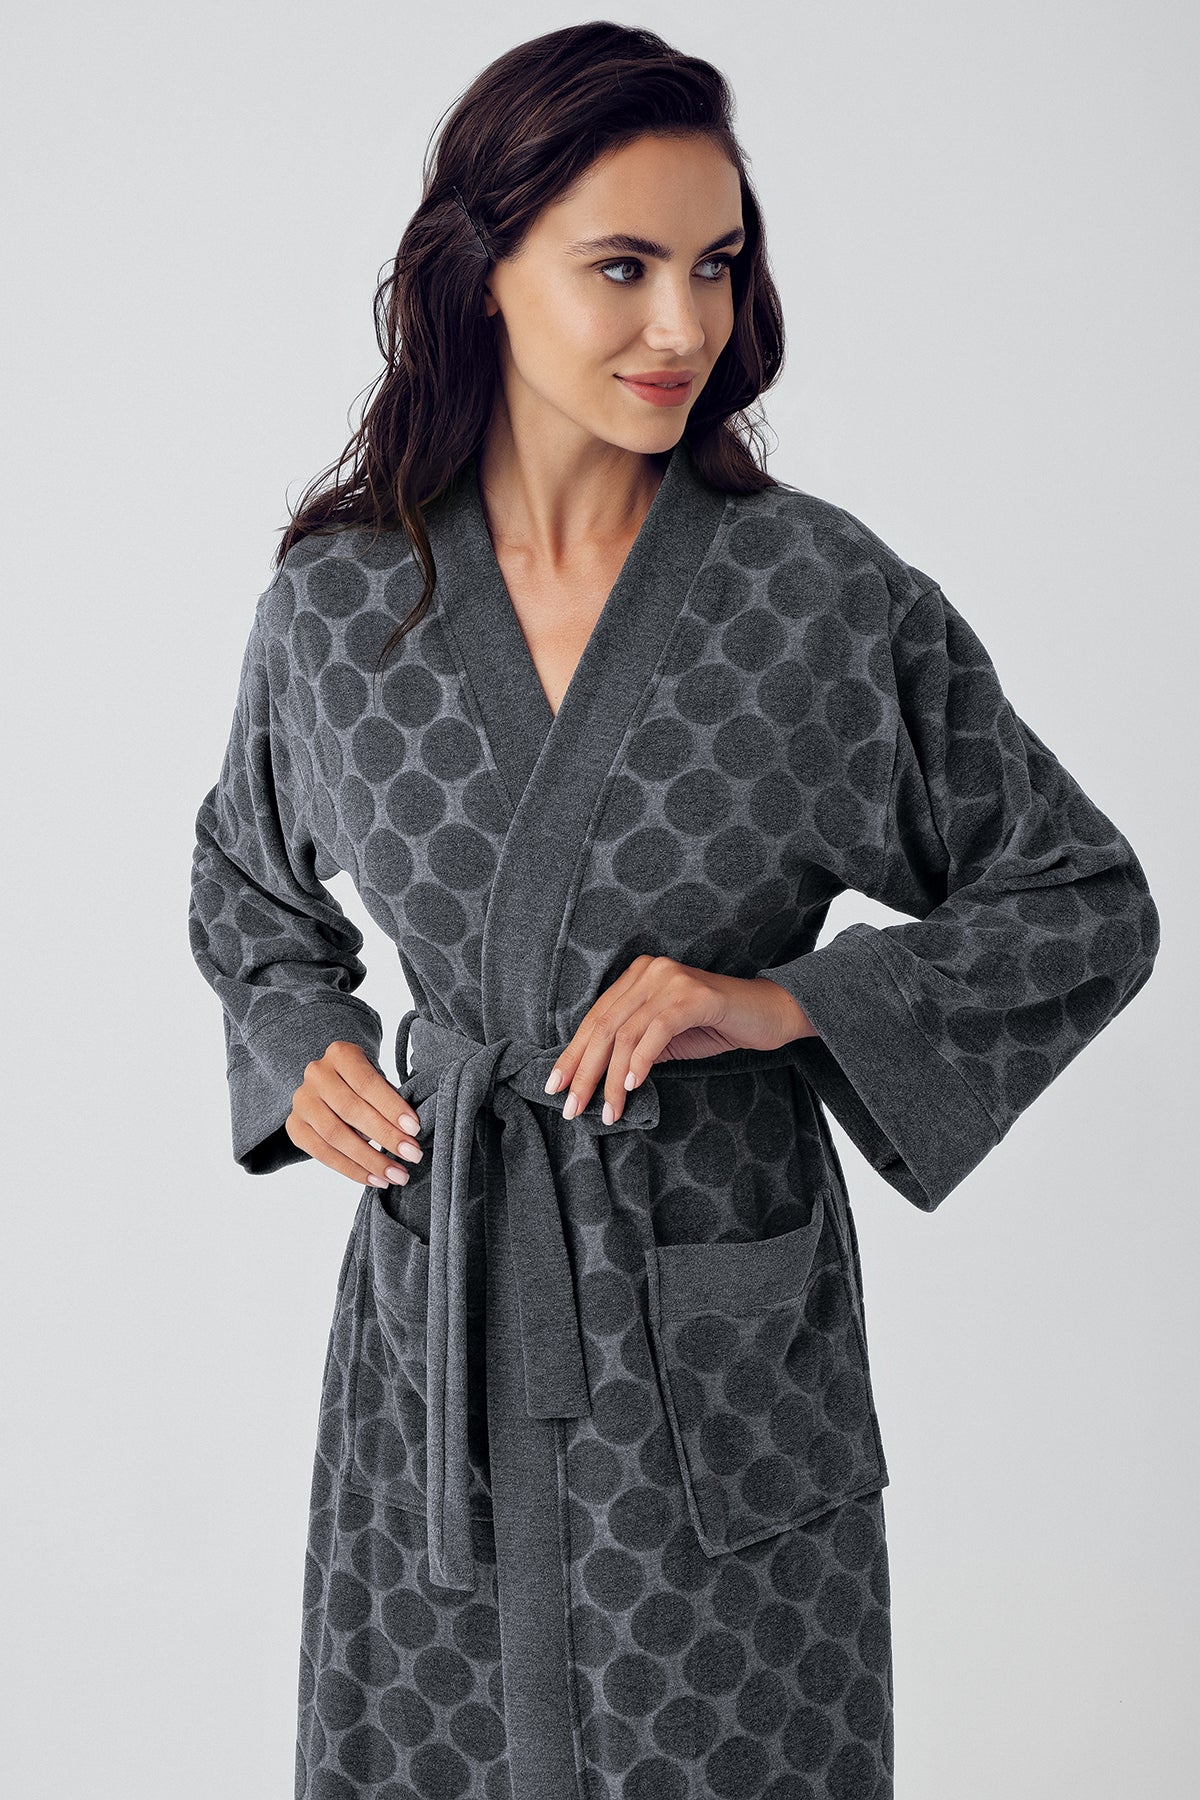 Shopymommy 500101 Terry Jacquard Maternity & Nursing Nightgown With Robe Anthracite